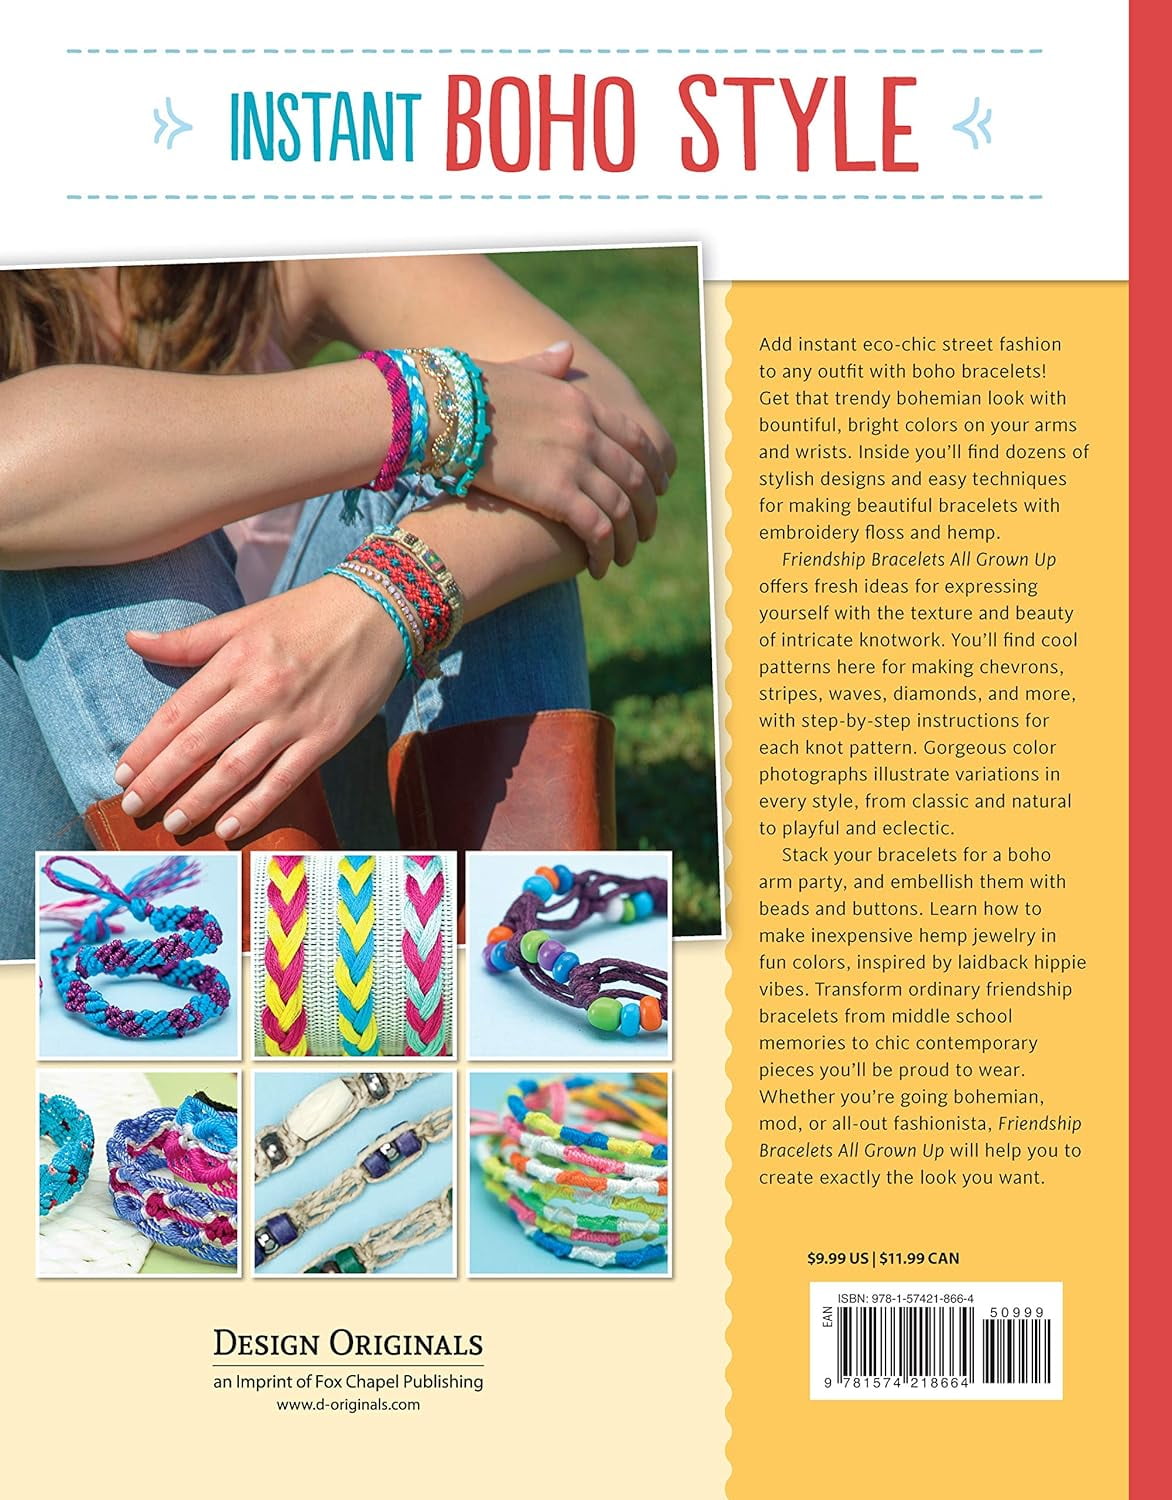 The Beginner's Guide to Friendship Bracelets by Masha Knots (Ebook) - Read  free for 30 days